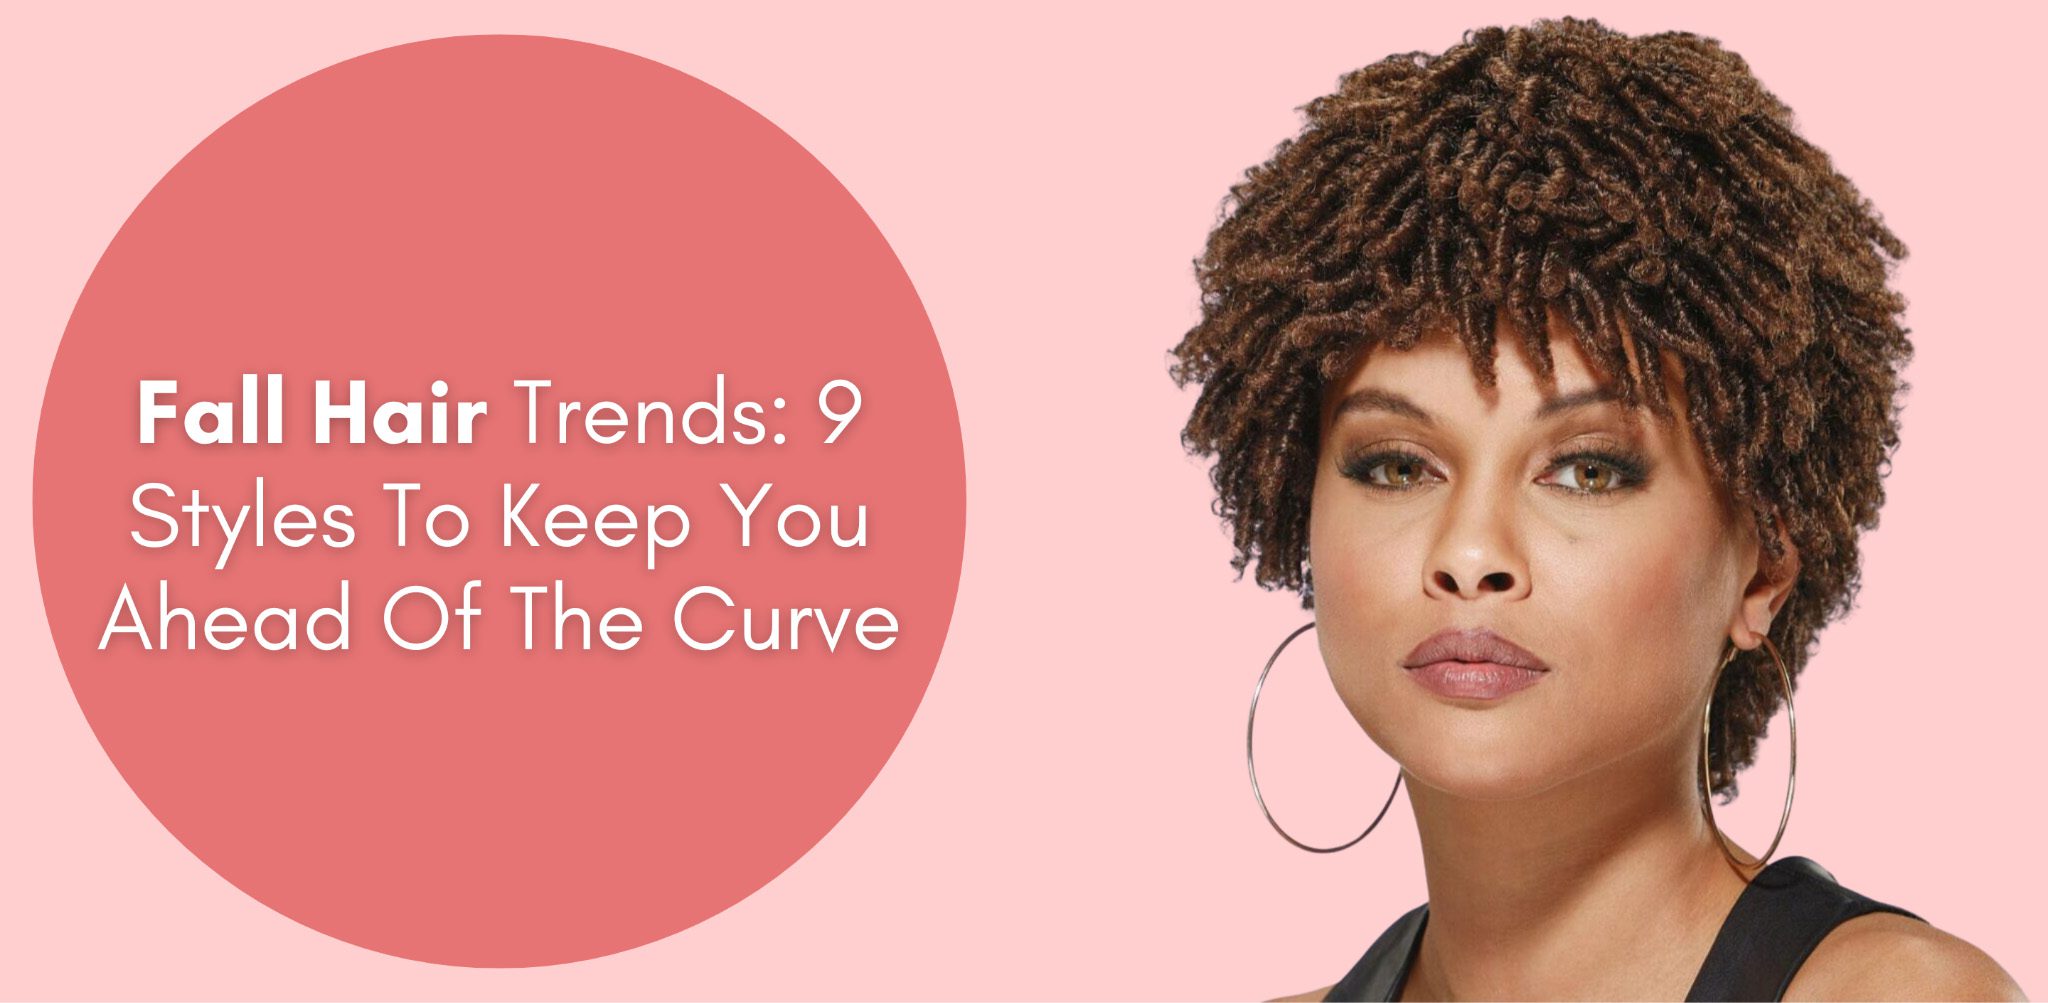 Fall Hair Trends: 9 Styles To Keep You Ahead Of The Curve